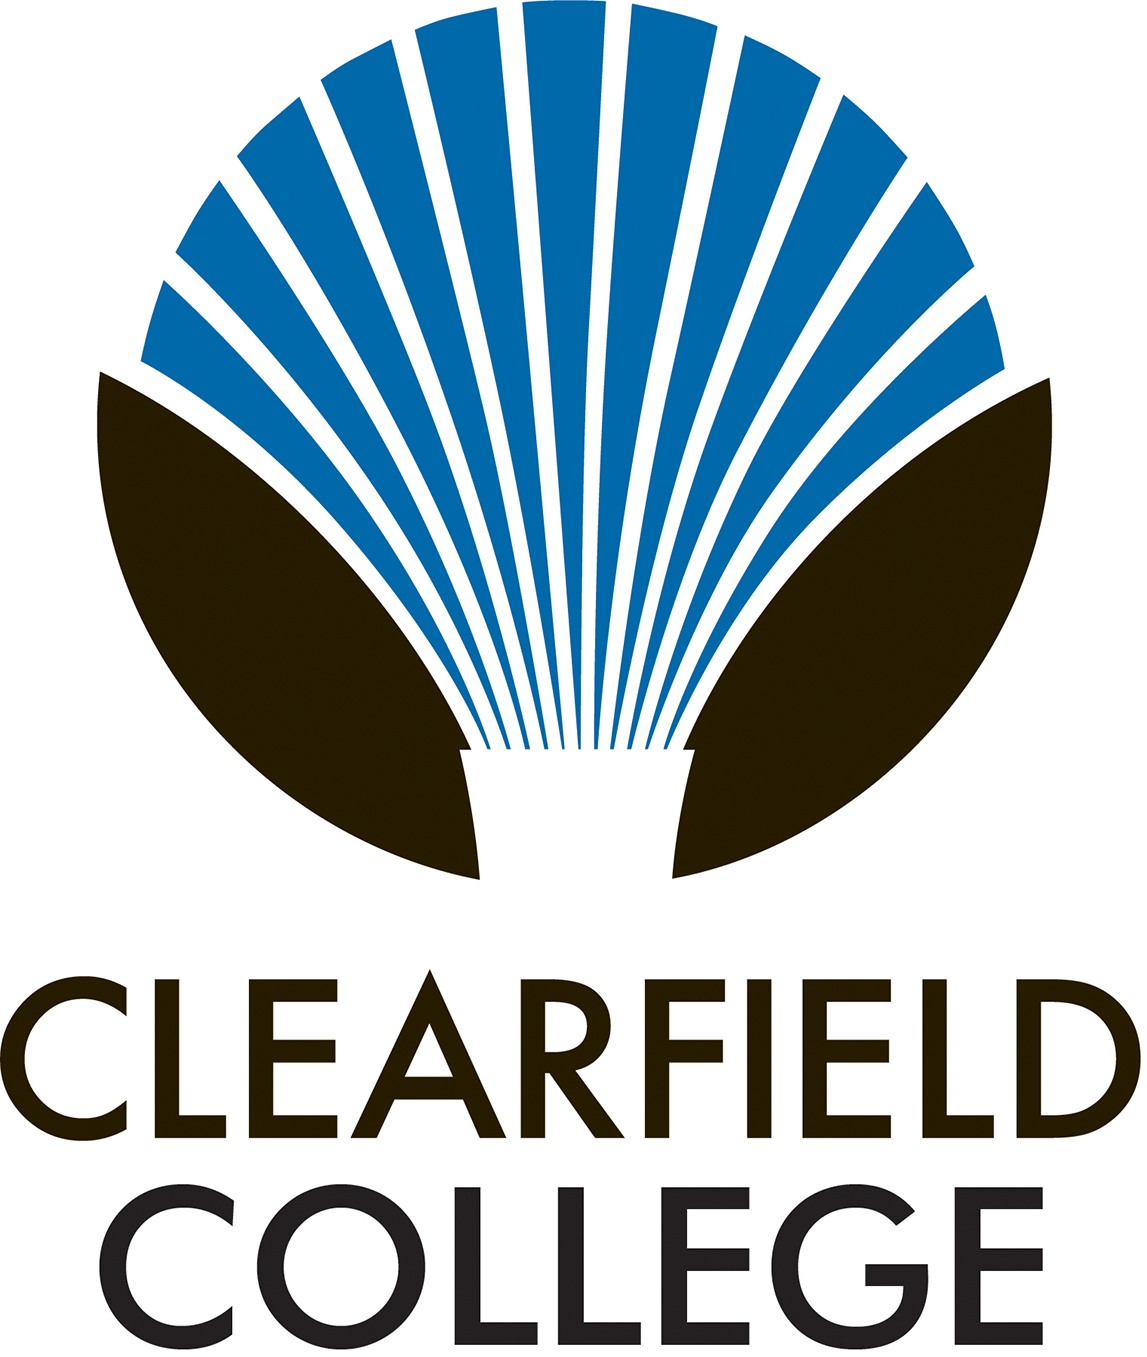 Clearfield college logo 